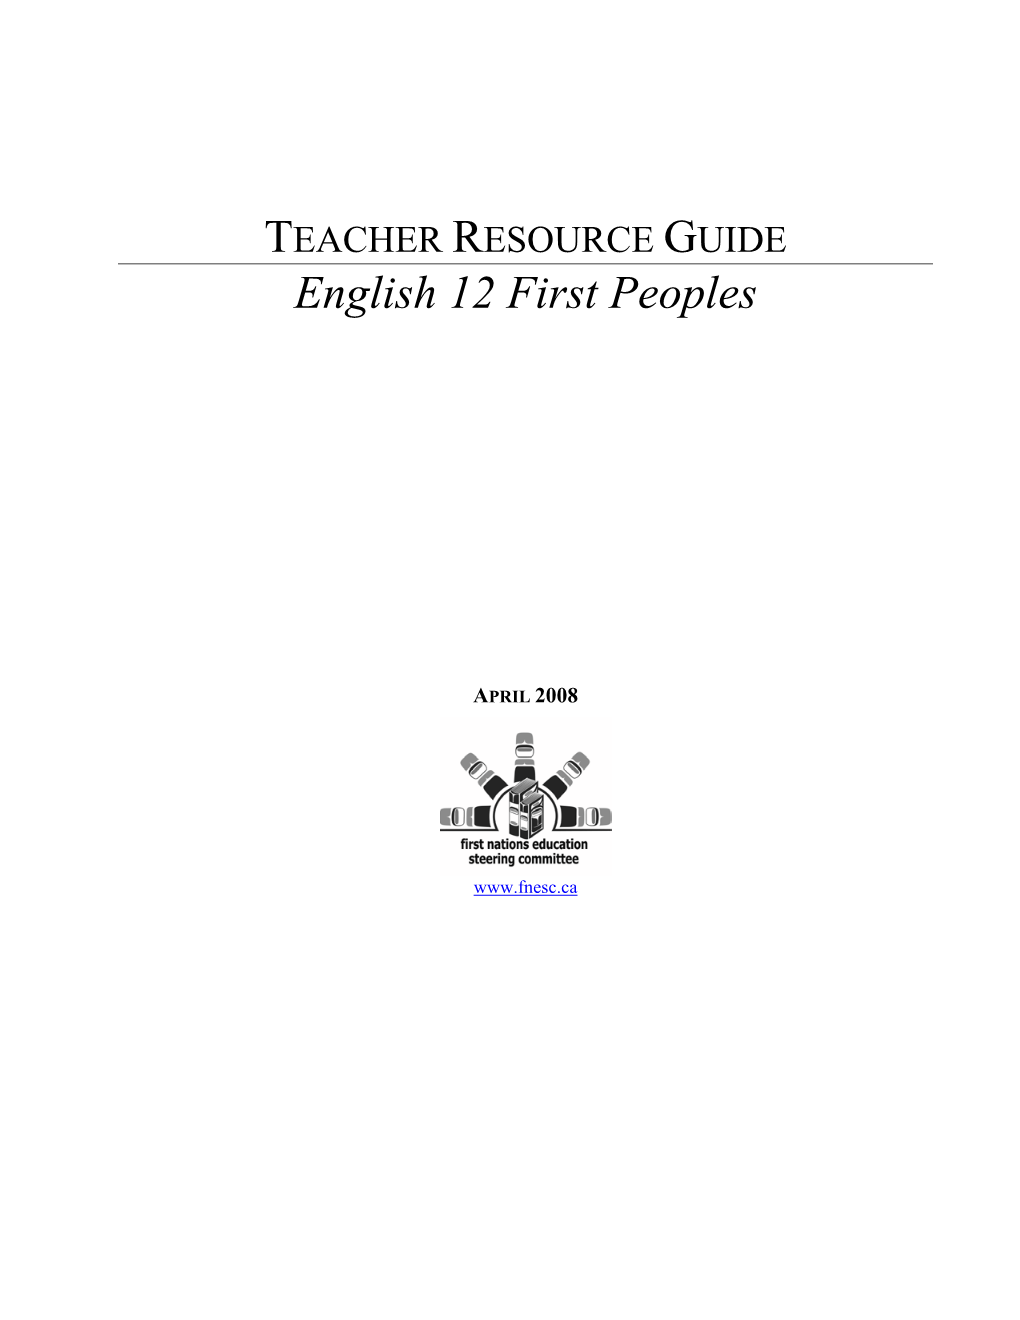 ENGLISH 12 FIRST PEOPLES TEACHER RESOURCE GUIDE DEVELOPMENT TEAM Starla Anderson School District No